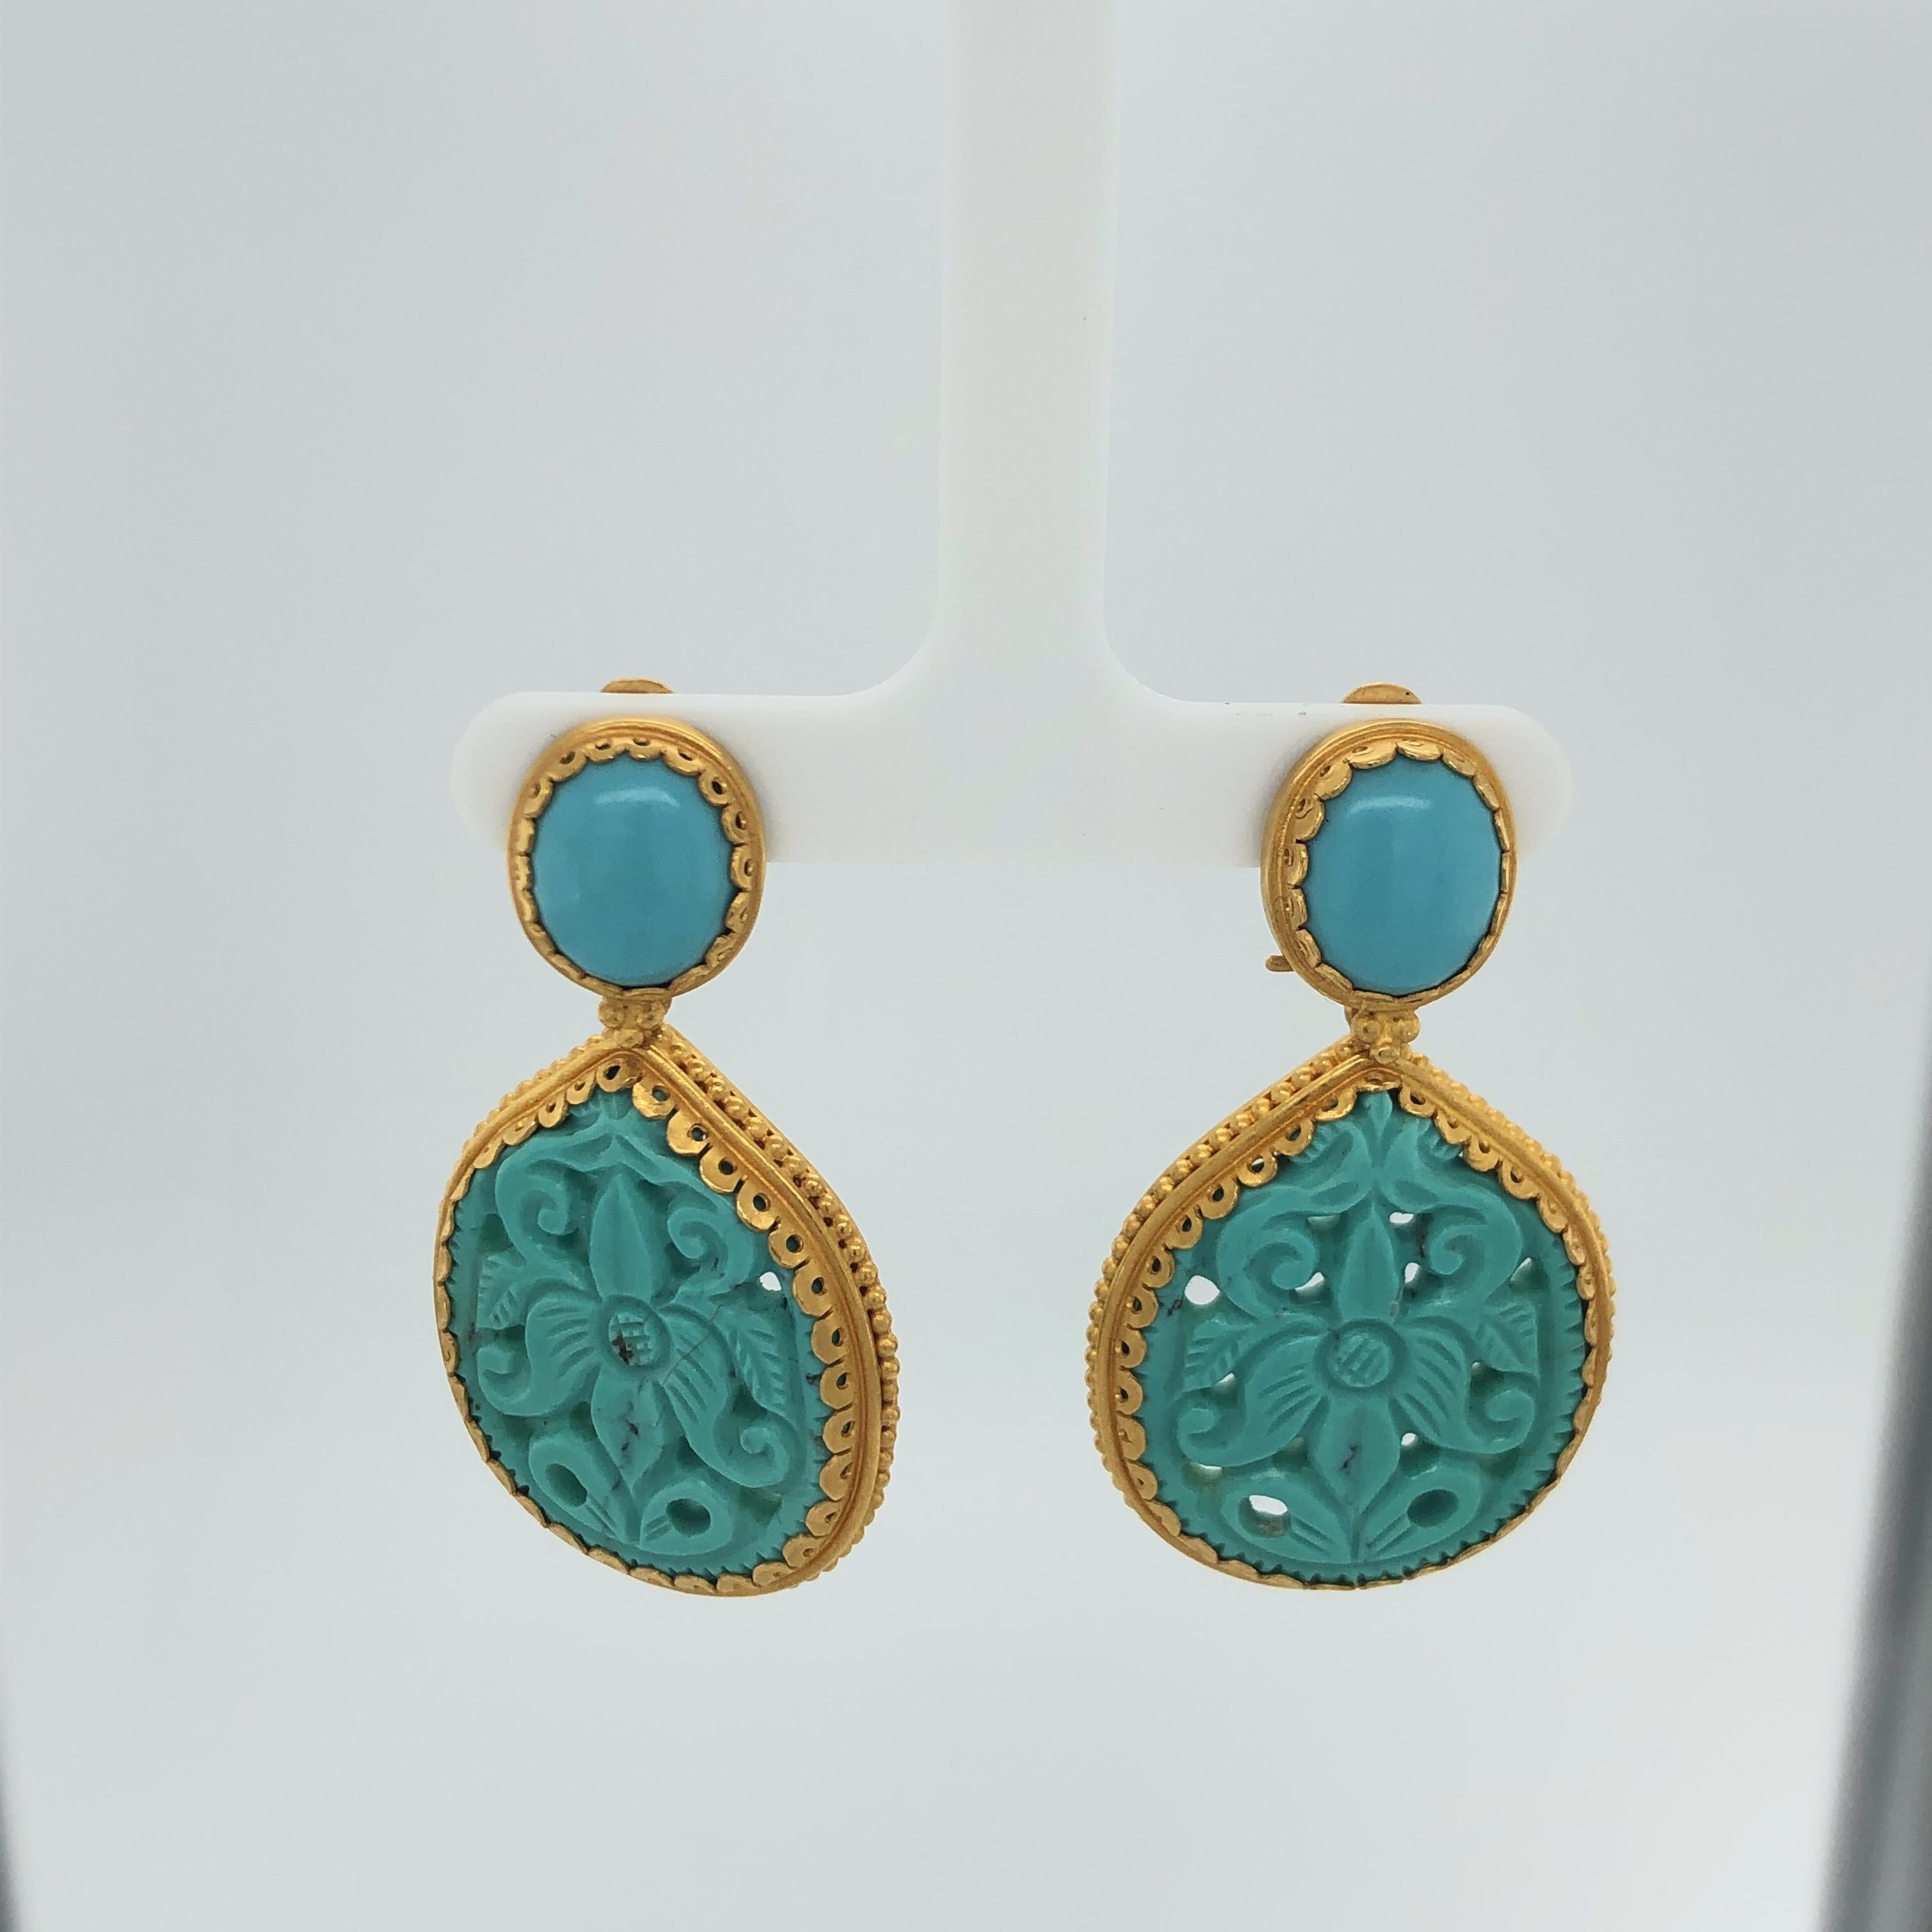 Carolyn Tyler 22K Yellow Gold 45.5 CT Carved Arizona Turquoise Earrings  These stunning earrings have a life of their own with beautiful carvings matched with the yellow gold.  The charms are removable and the posts can be worn alone or with other